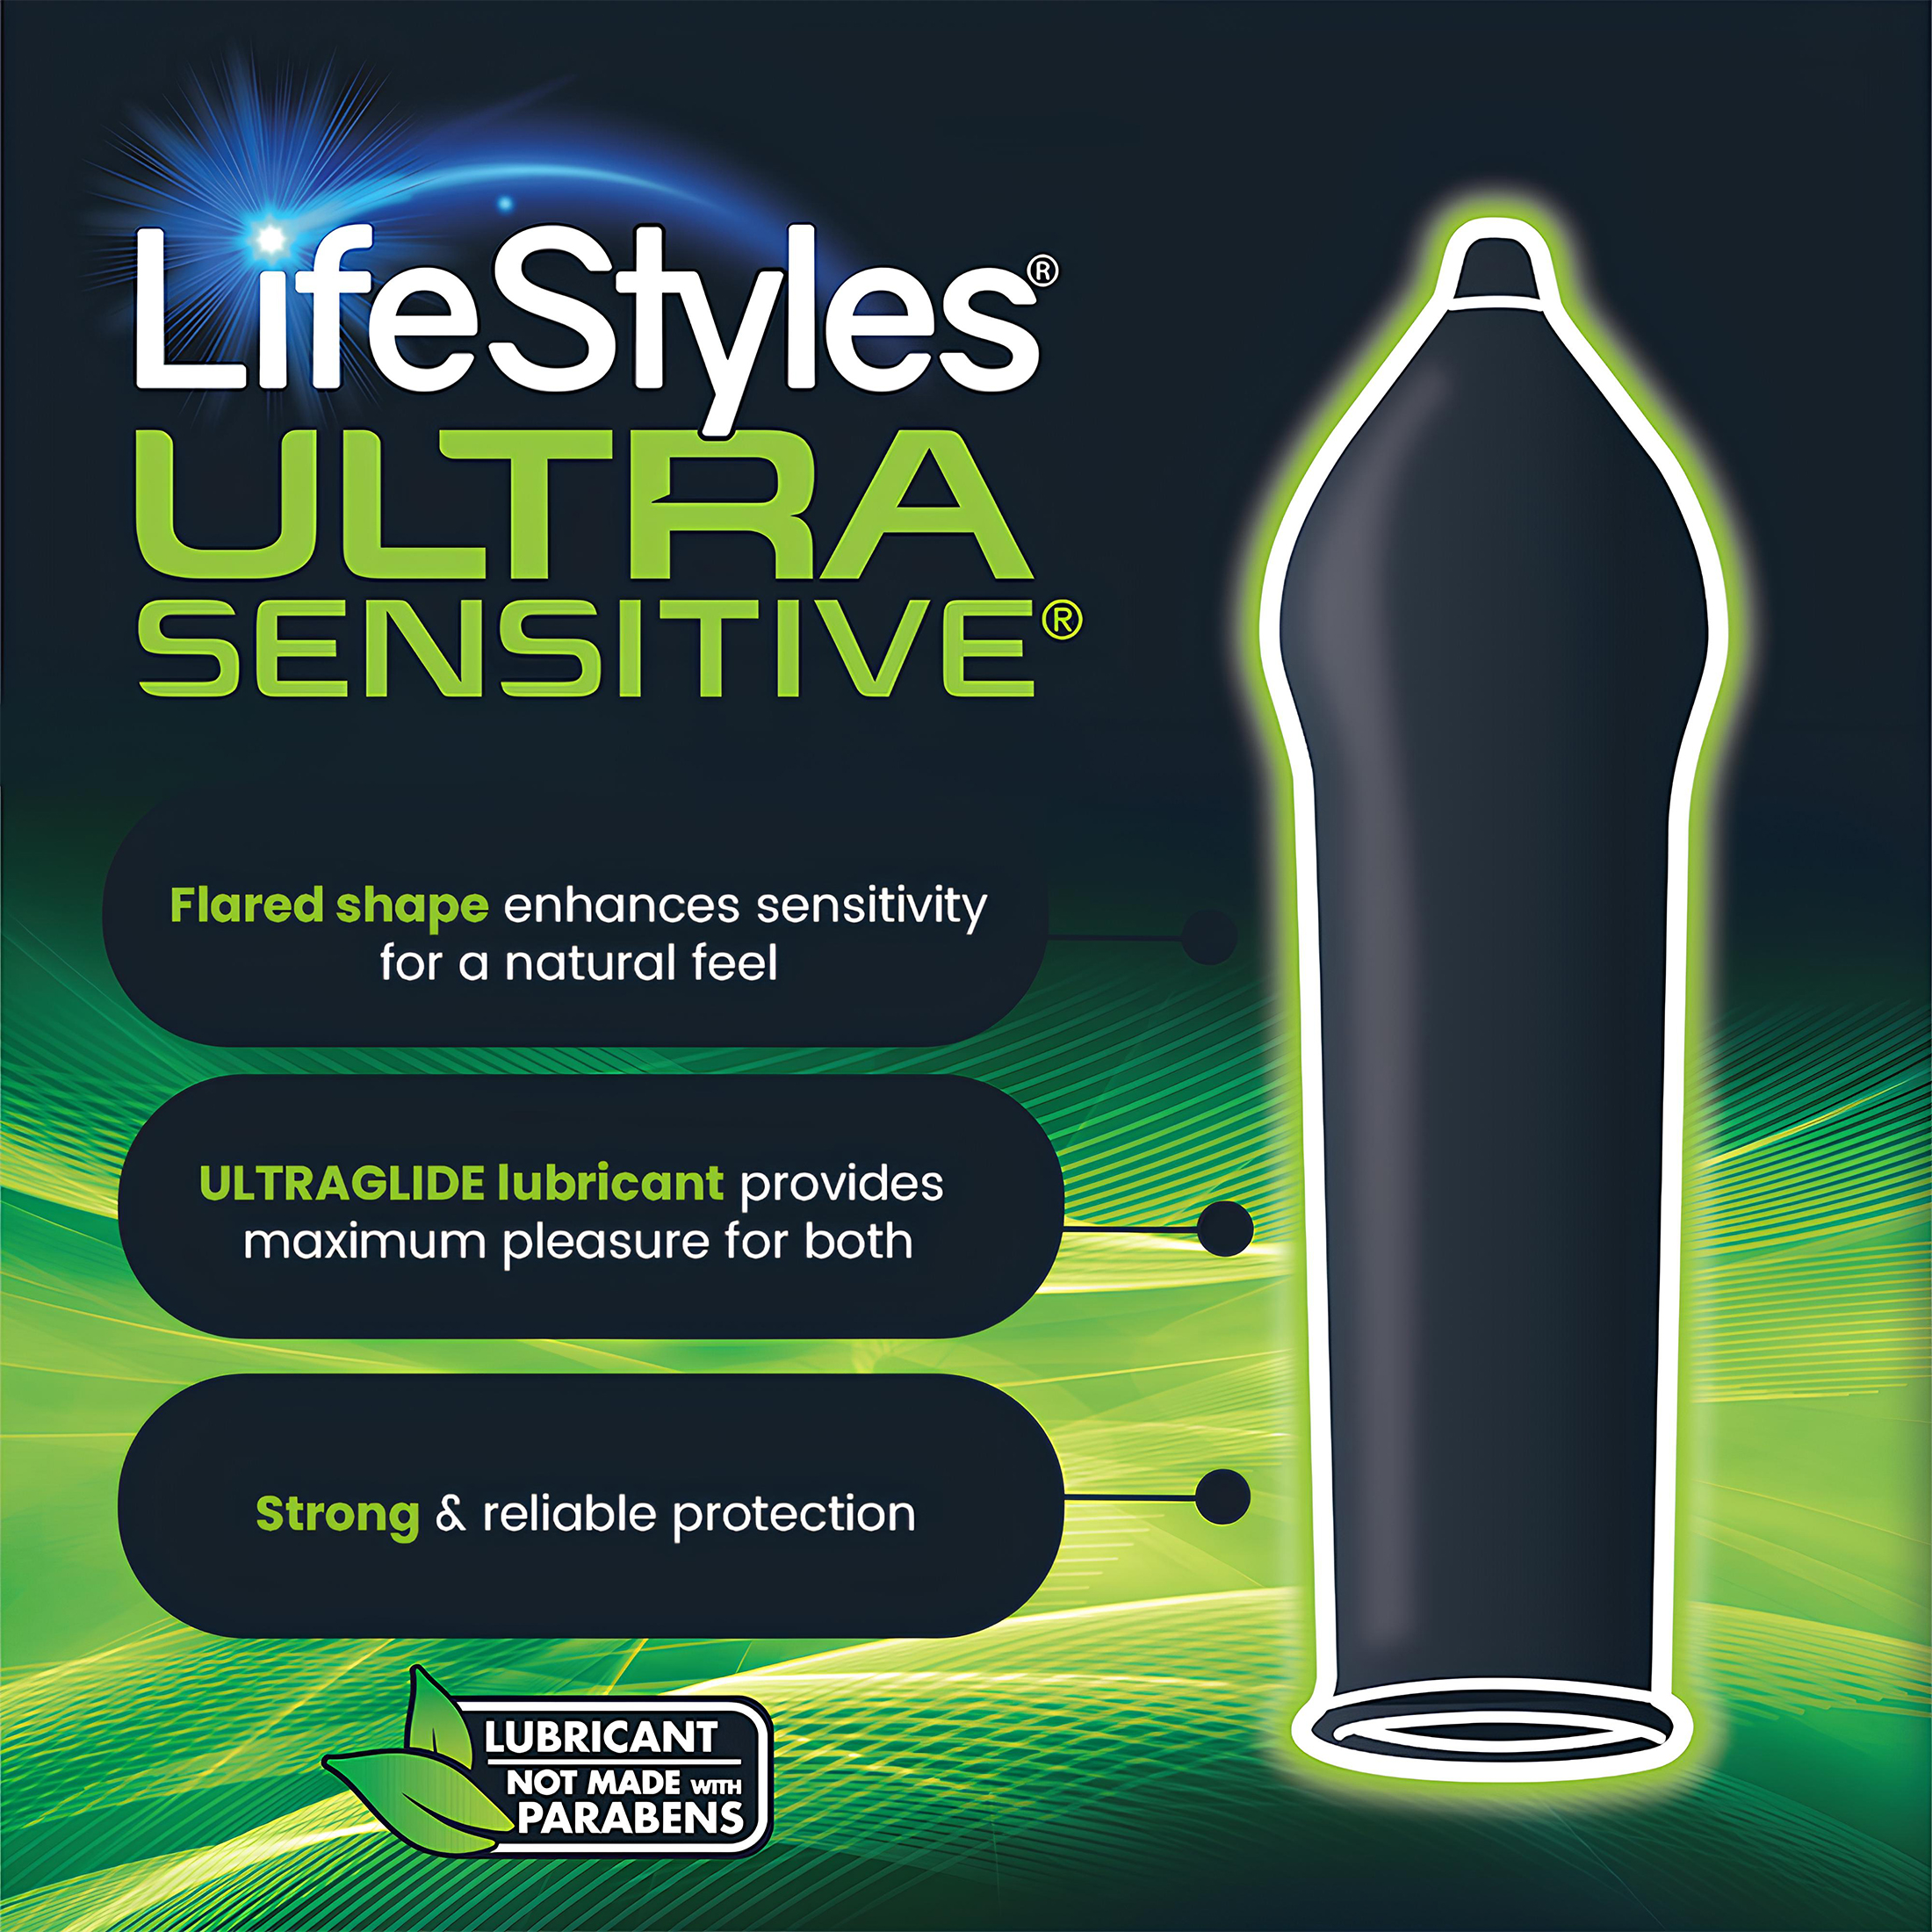 LifeStyles Ultra-Sensitive Lubricated Latex Condoms, 40 Count - image 3 of 7